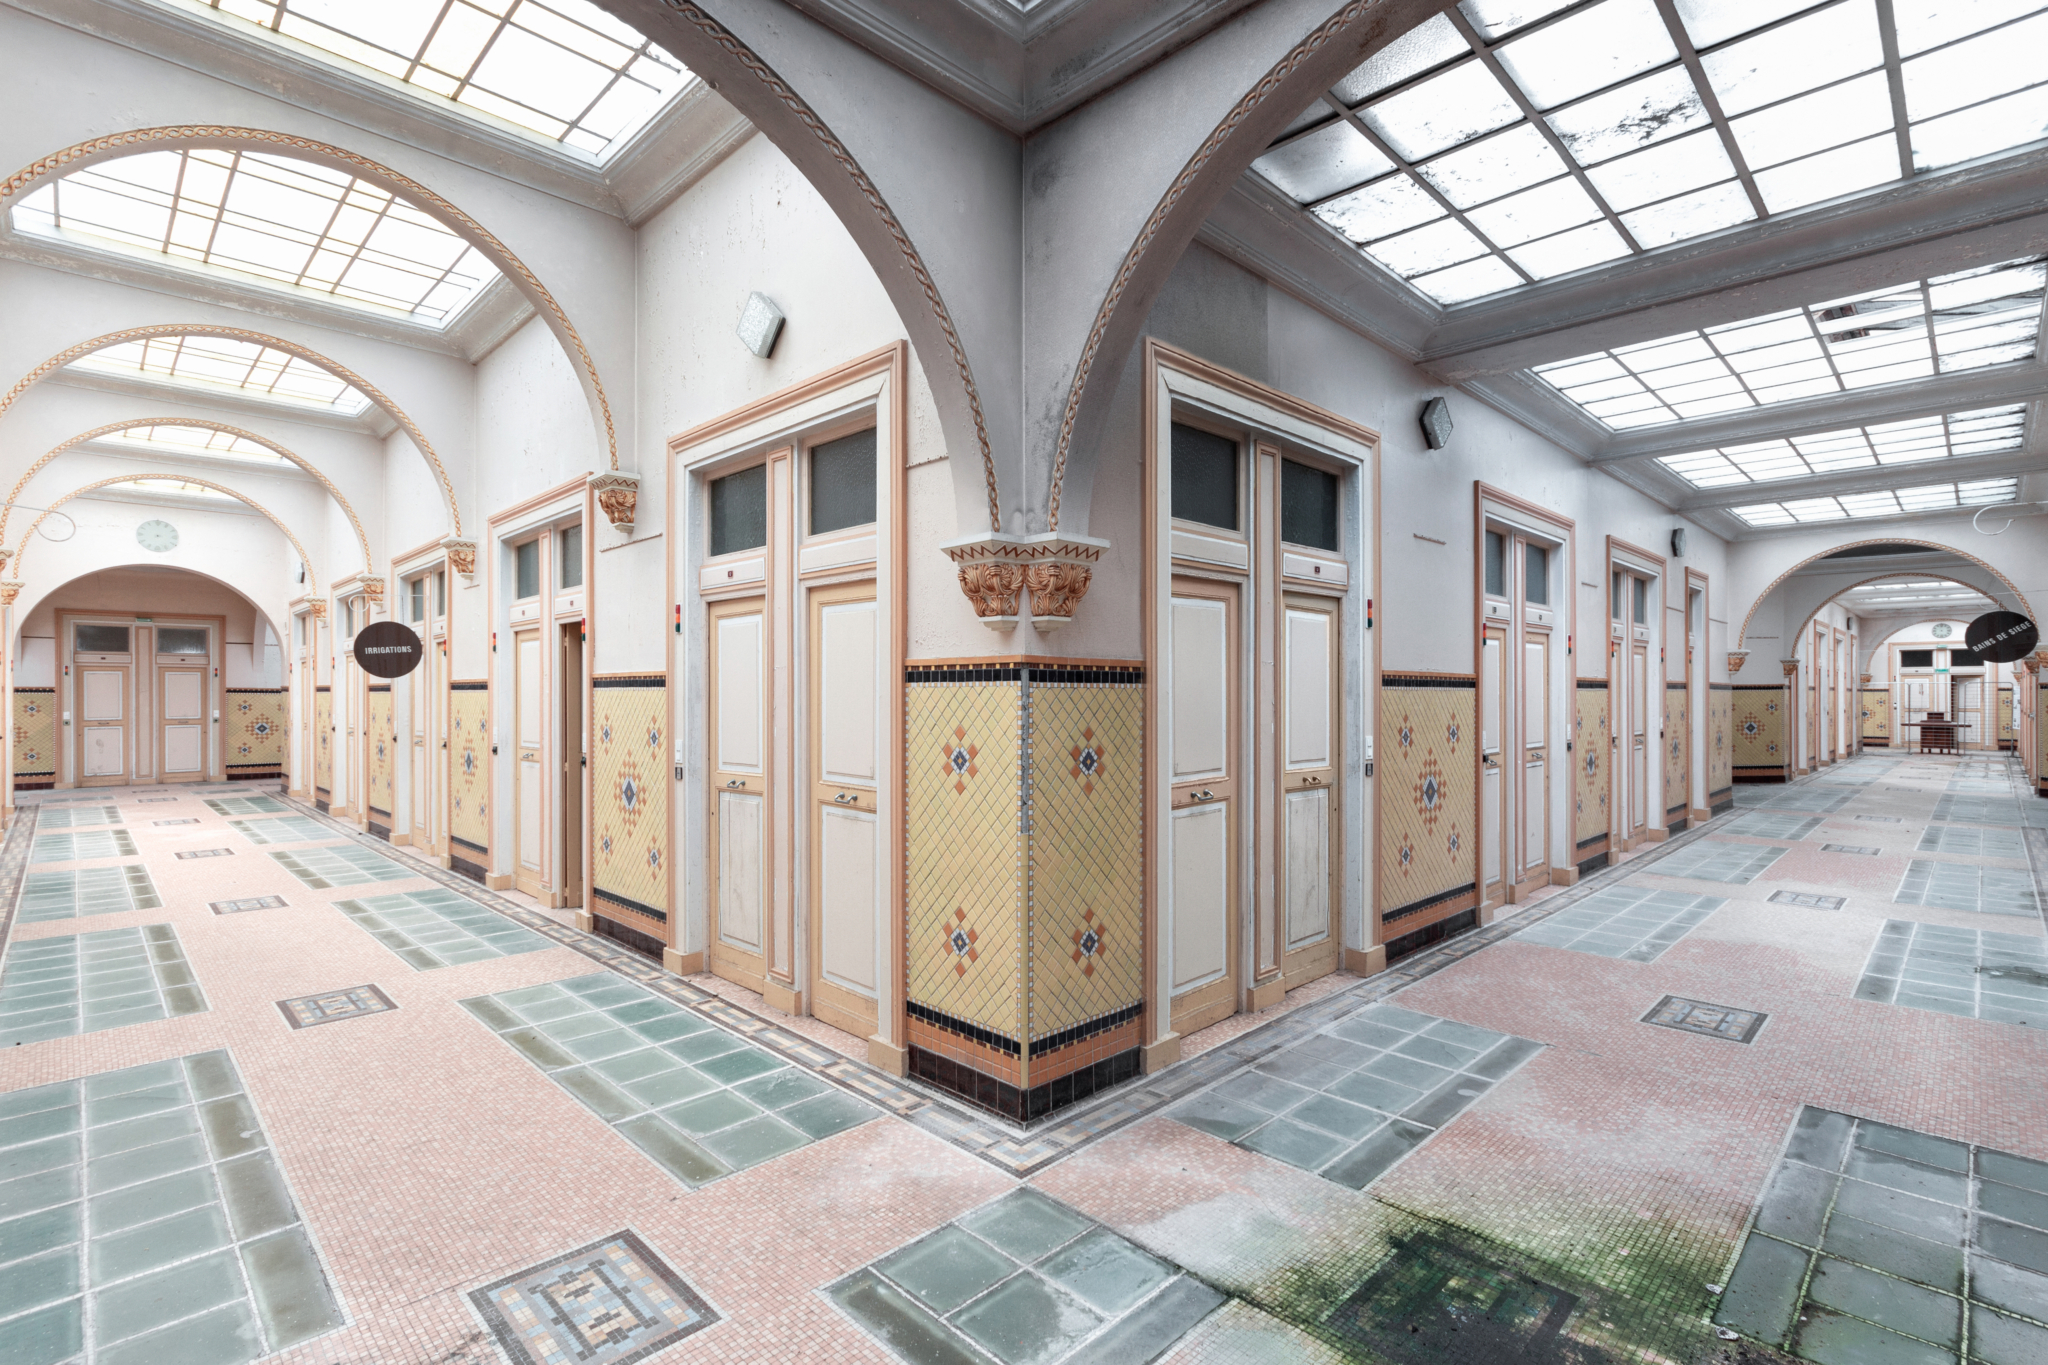 Abandoned corridors inside thermal baths with grandiose architecture in France